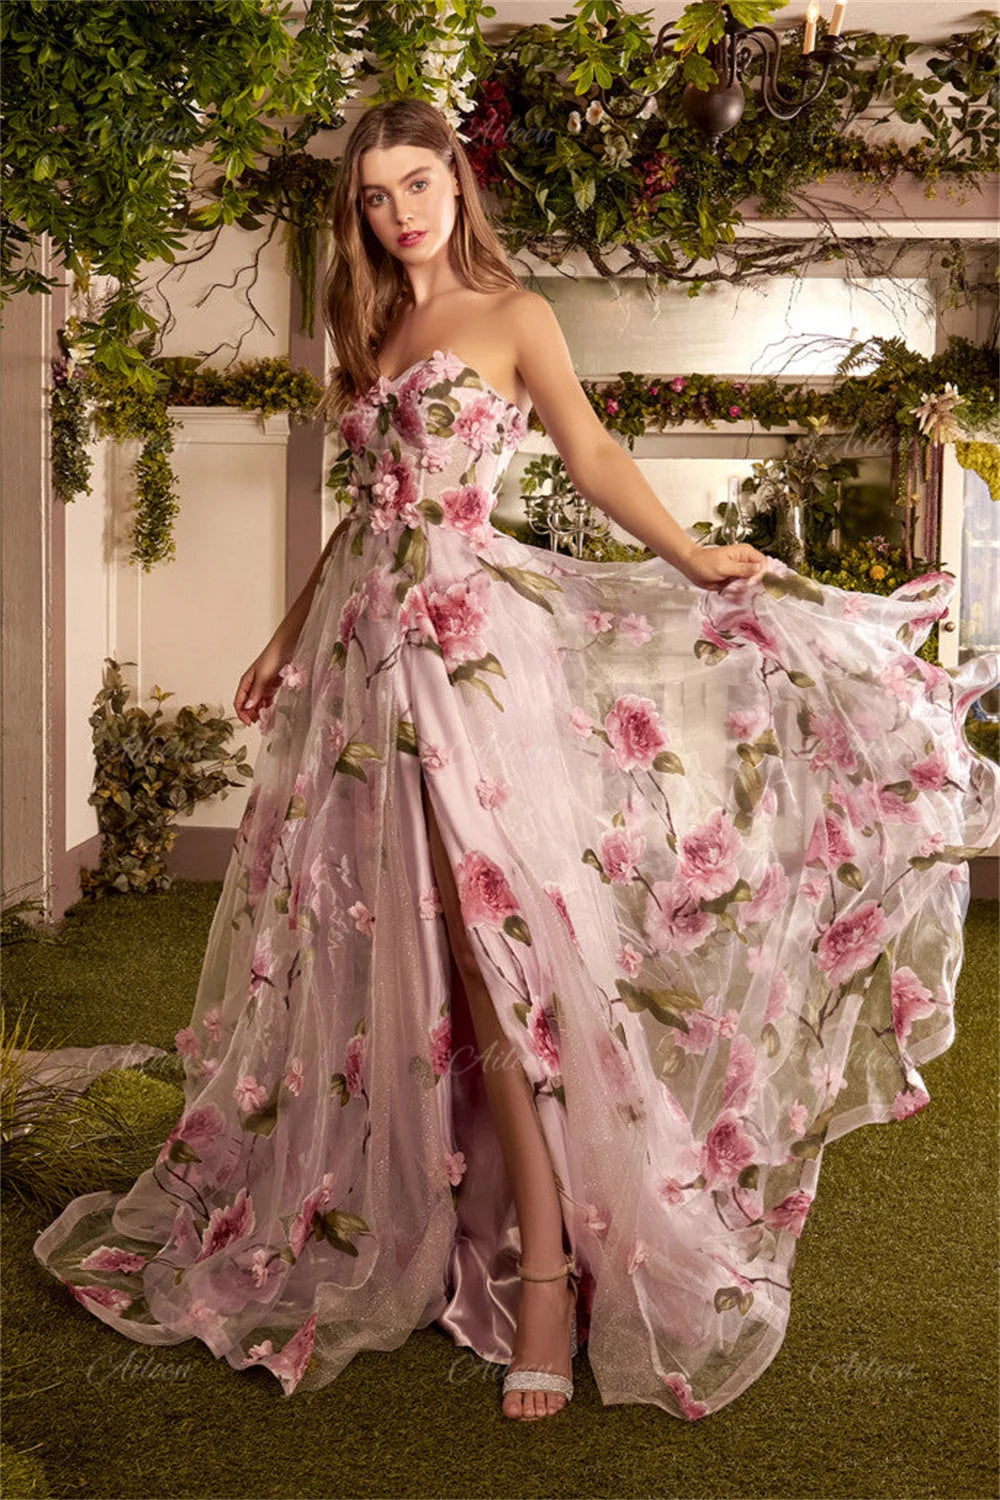 Aileen's 3D Flower Embroidery Party Dresses. An Elegant Choice for Long Wedding Celebrations – Luxurious Chiffon, Sweetheart Neckline, and a Touch of Sexy Robe Glamour.